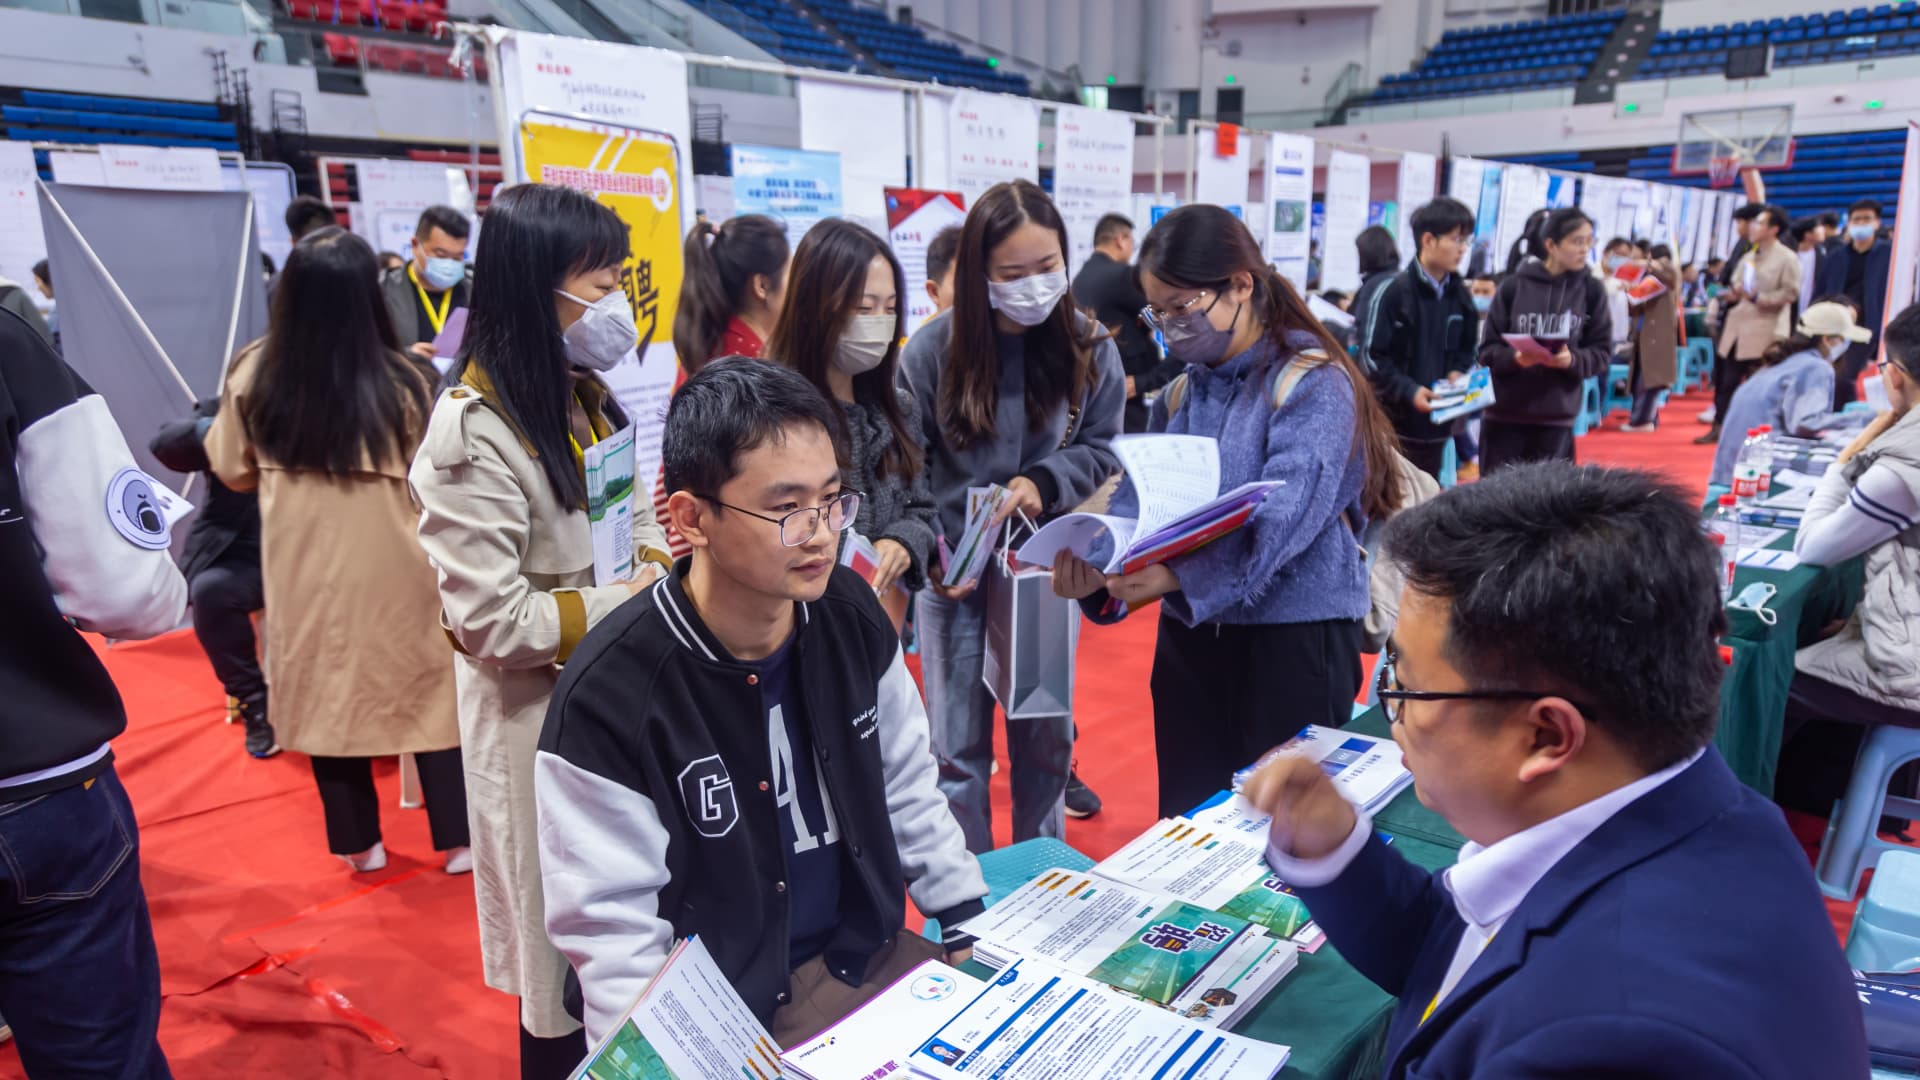 China's young face the prospect of dimmer economic gains amid record youth unemployment in the world's second-largest economy.